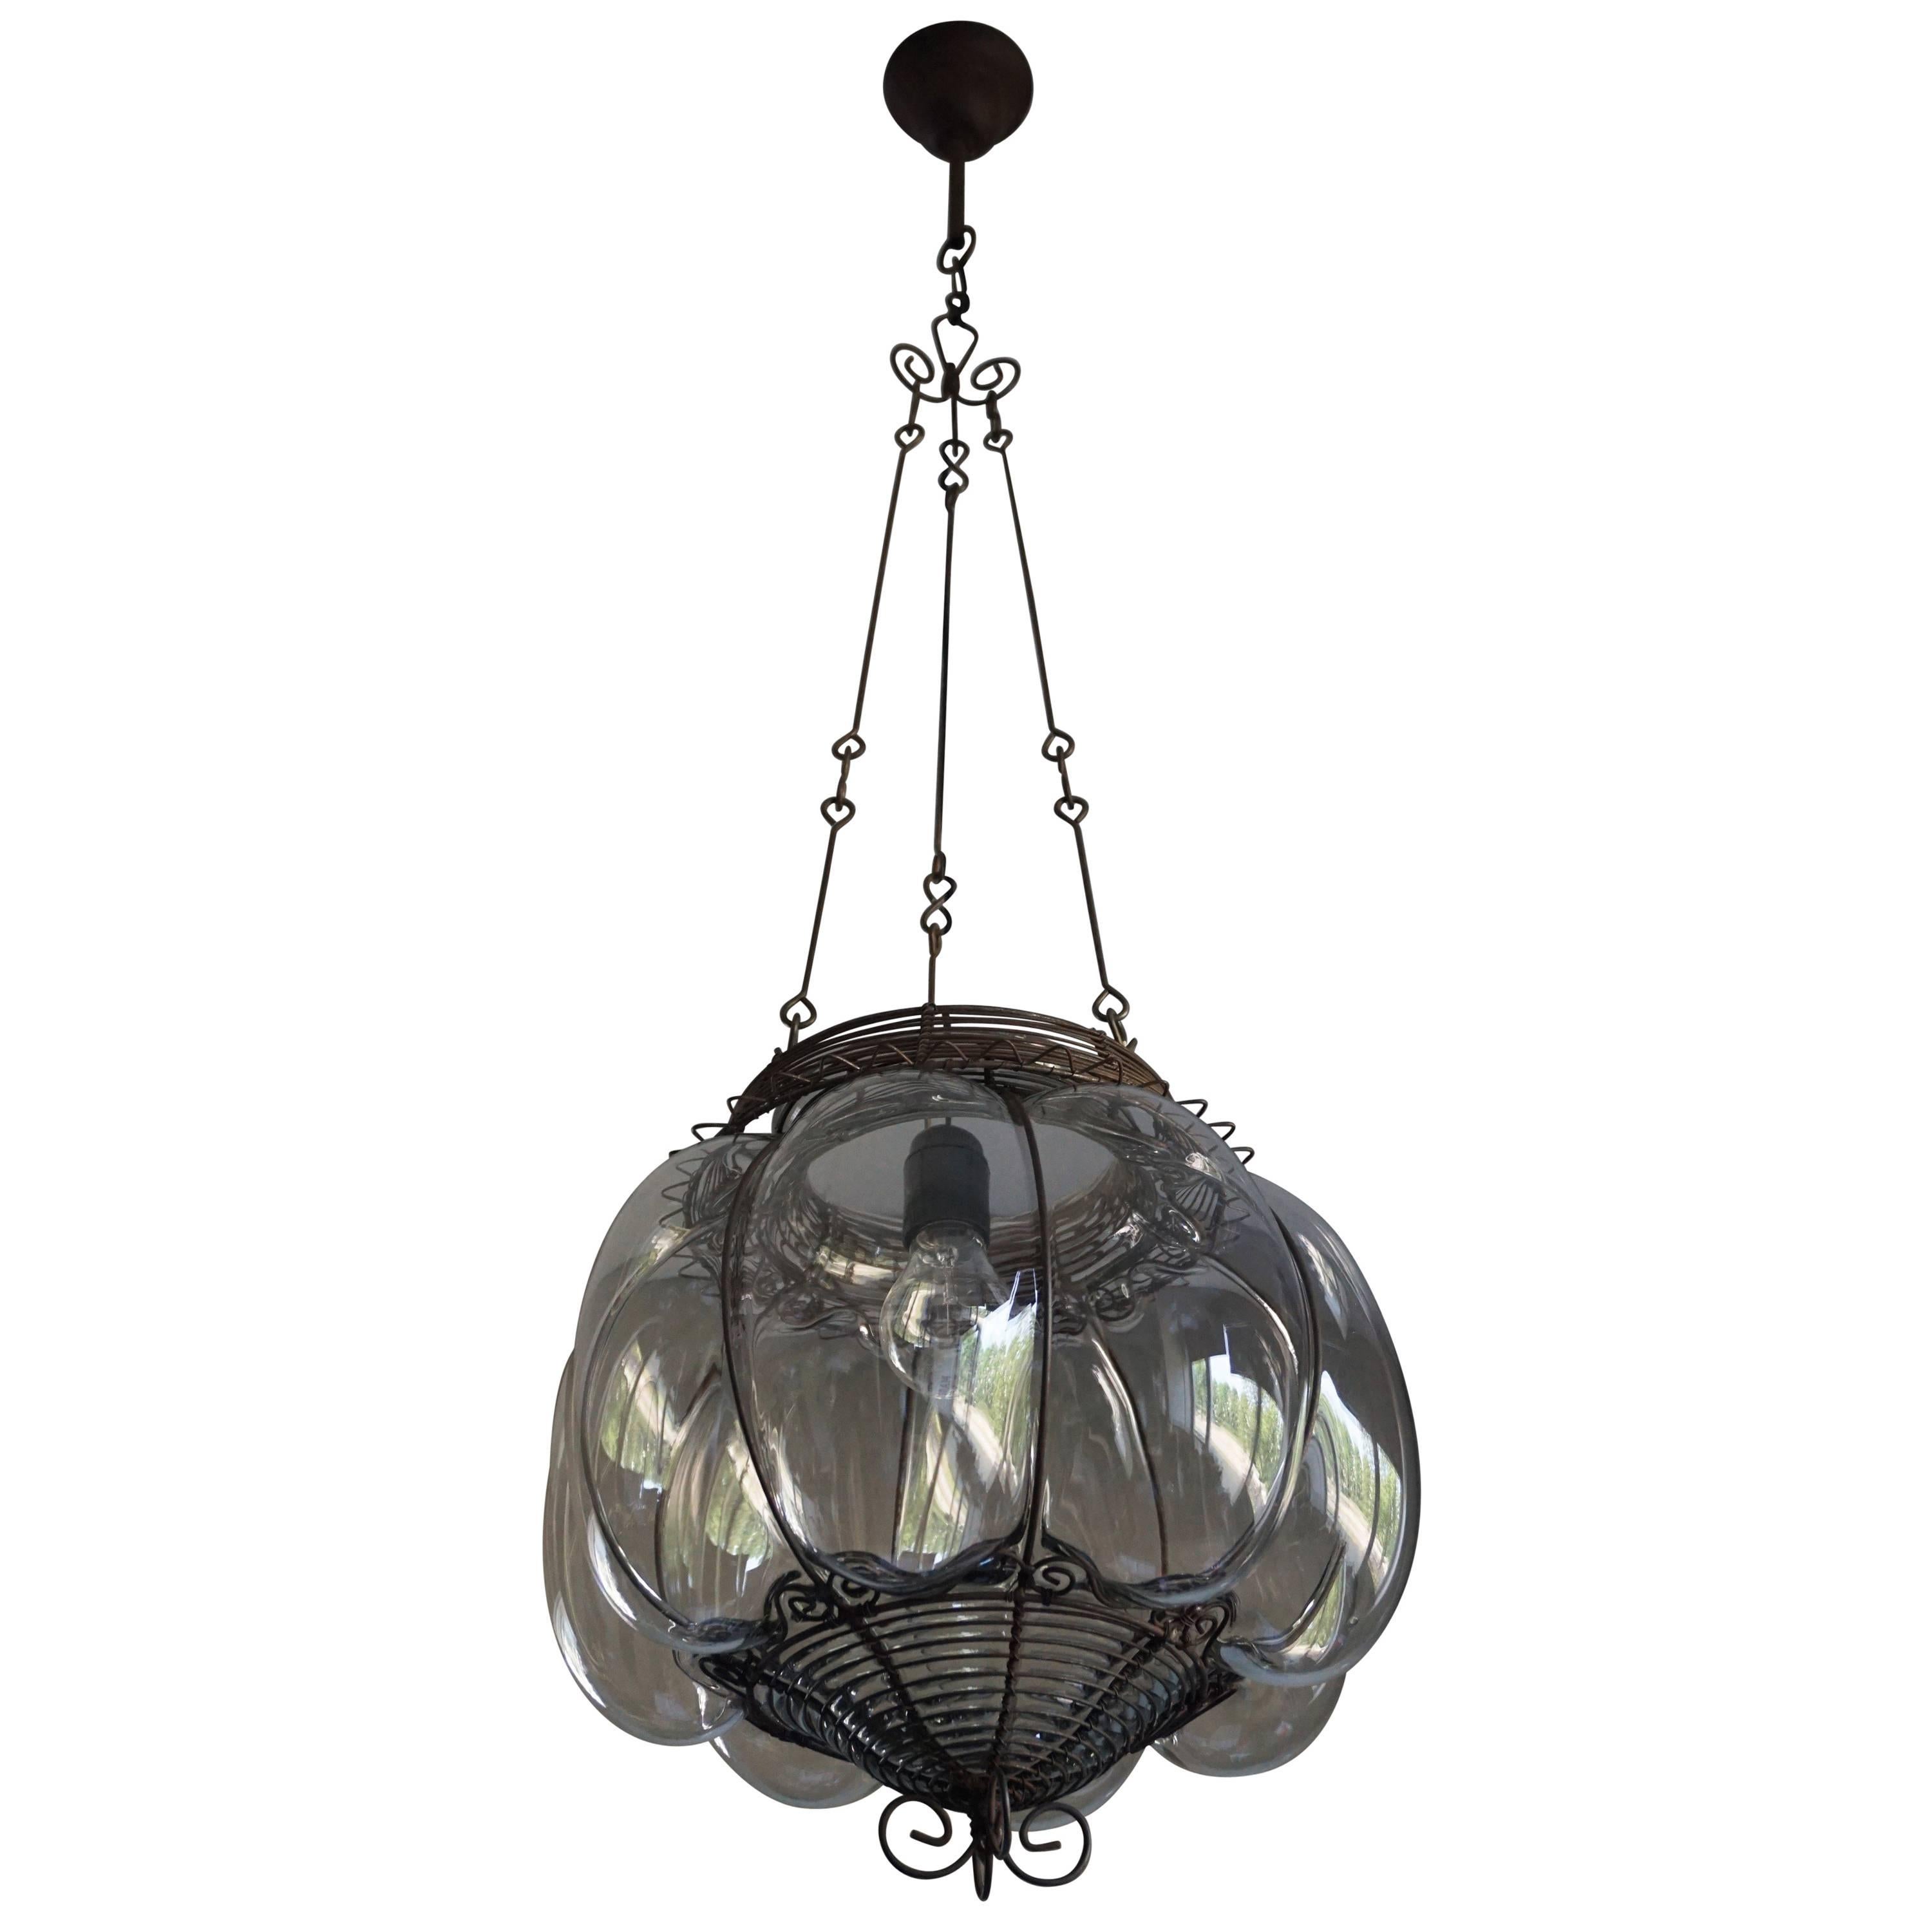 Venetian Mouthblown Glass into a Hand-crafted Iron Frame Pendant Light Fixture For Sale